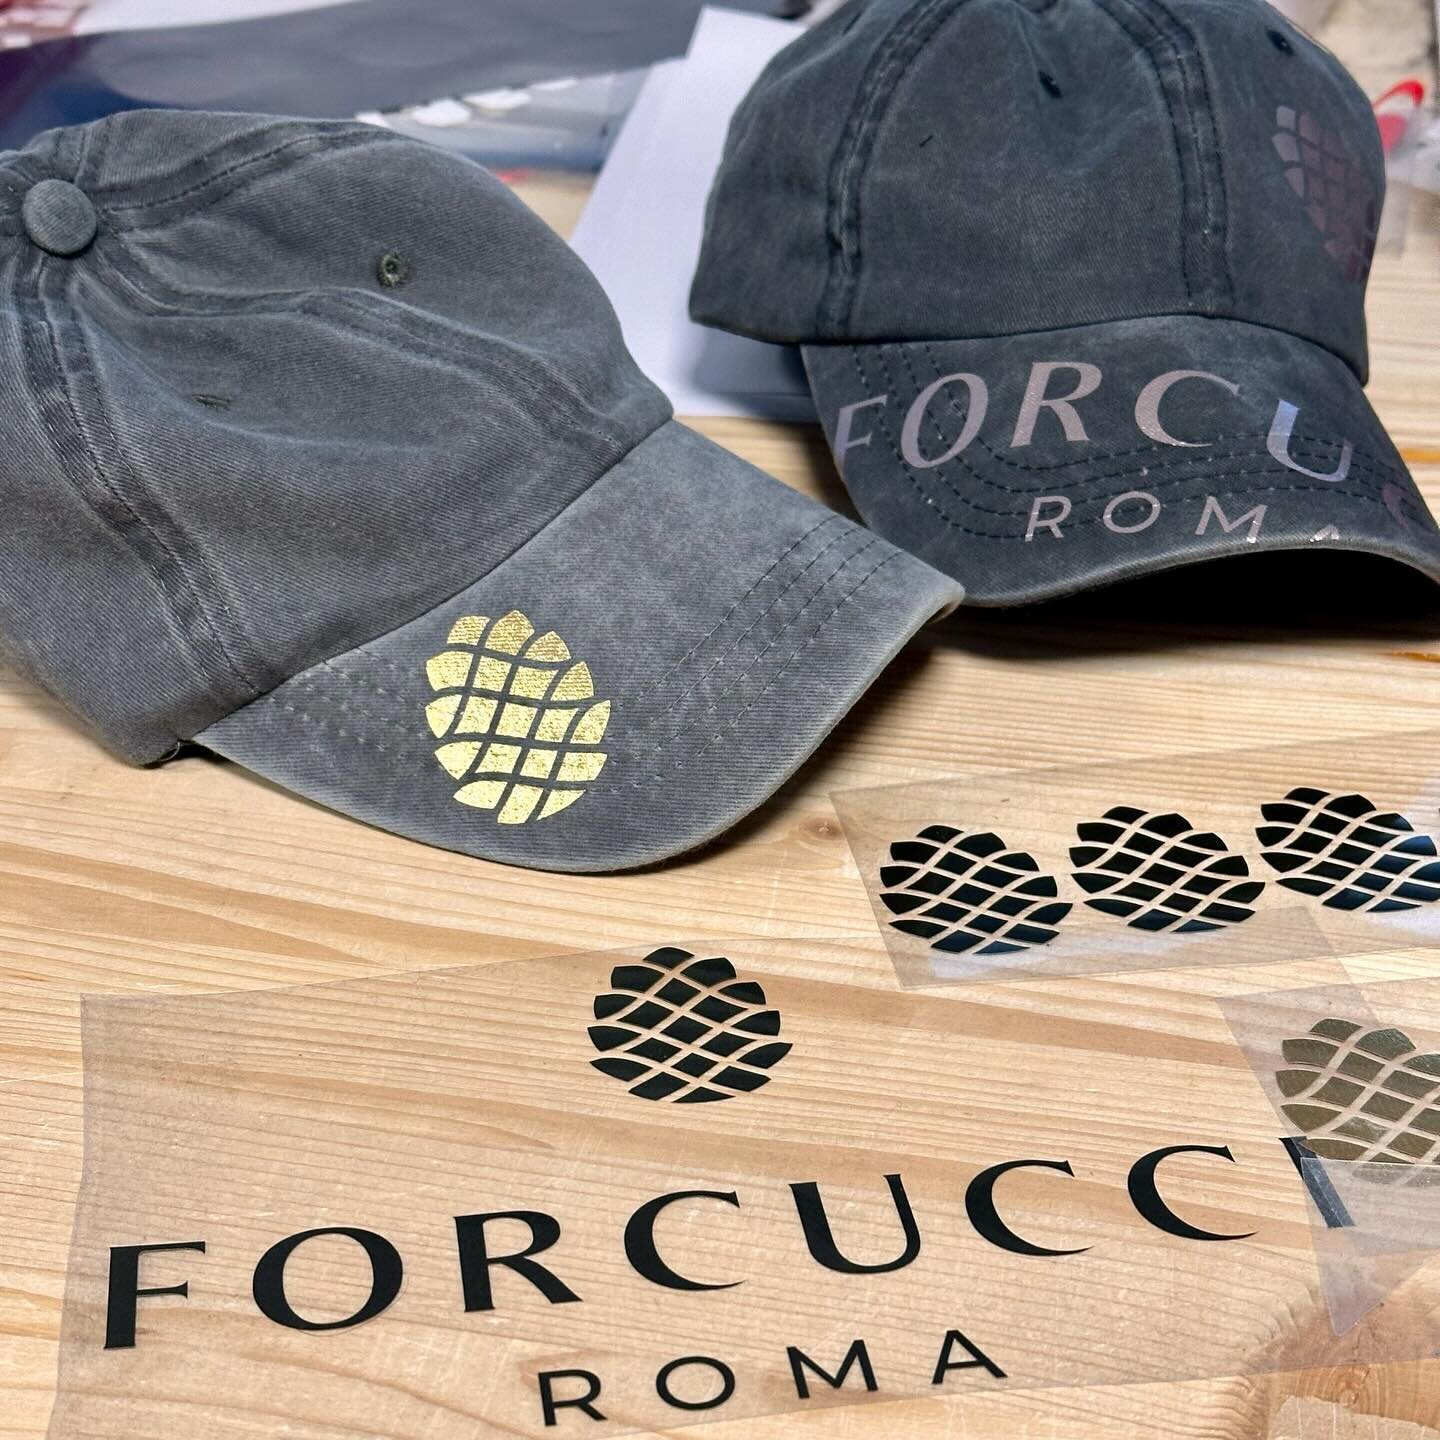 New Forcucci headwear design ideas made in Italy fresh off the printer. What do you think of this idea?

#forcucci #headwear #firenze #madeinitaly #pigna #graphicdesign #headweardesign #oneofakindstyle #luxuryheadwear #customheadwear